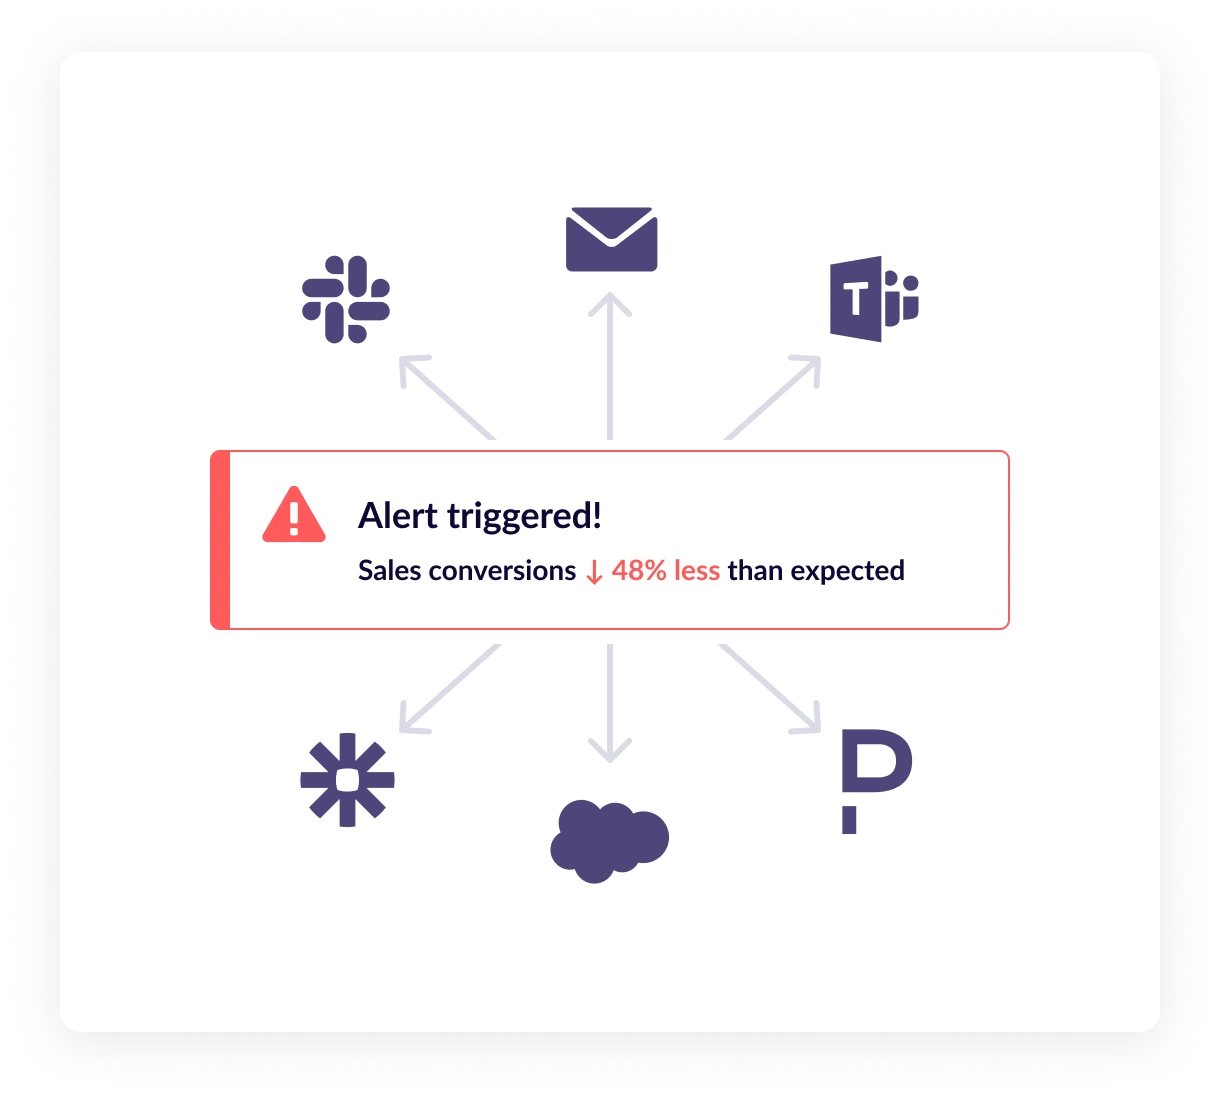 GA Insights sends an alert notification to your team using Slack, MSTeams and email.